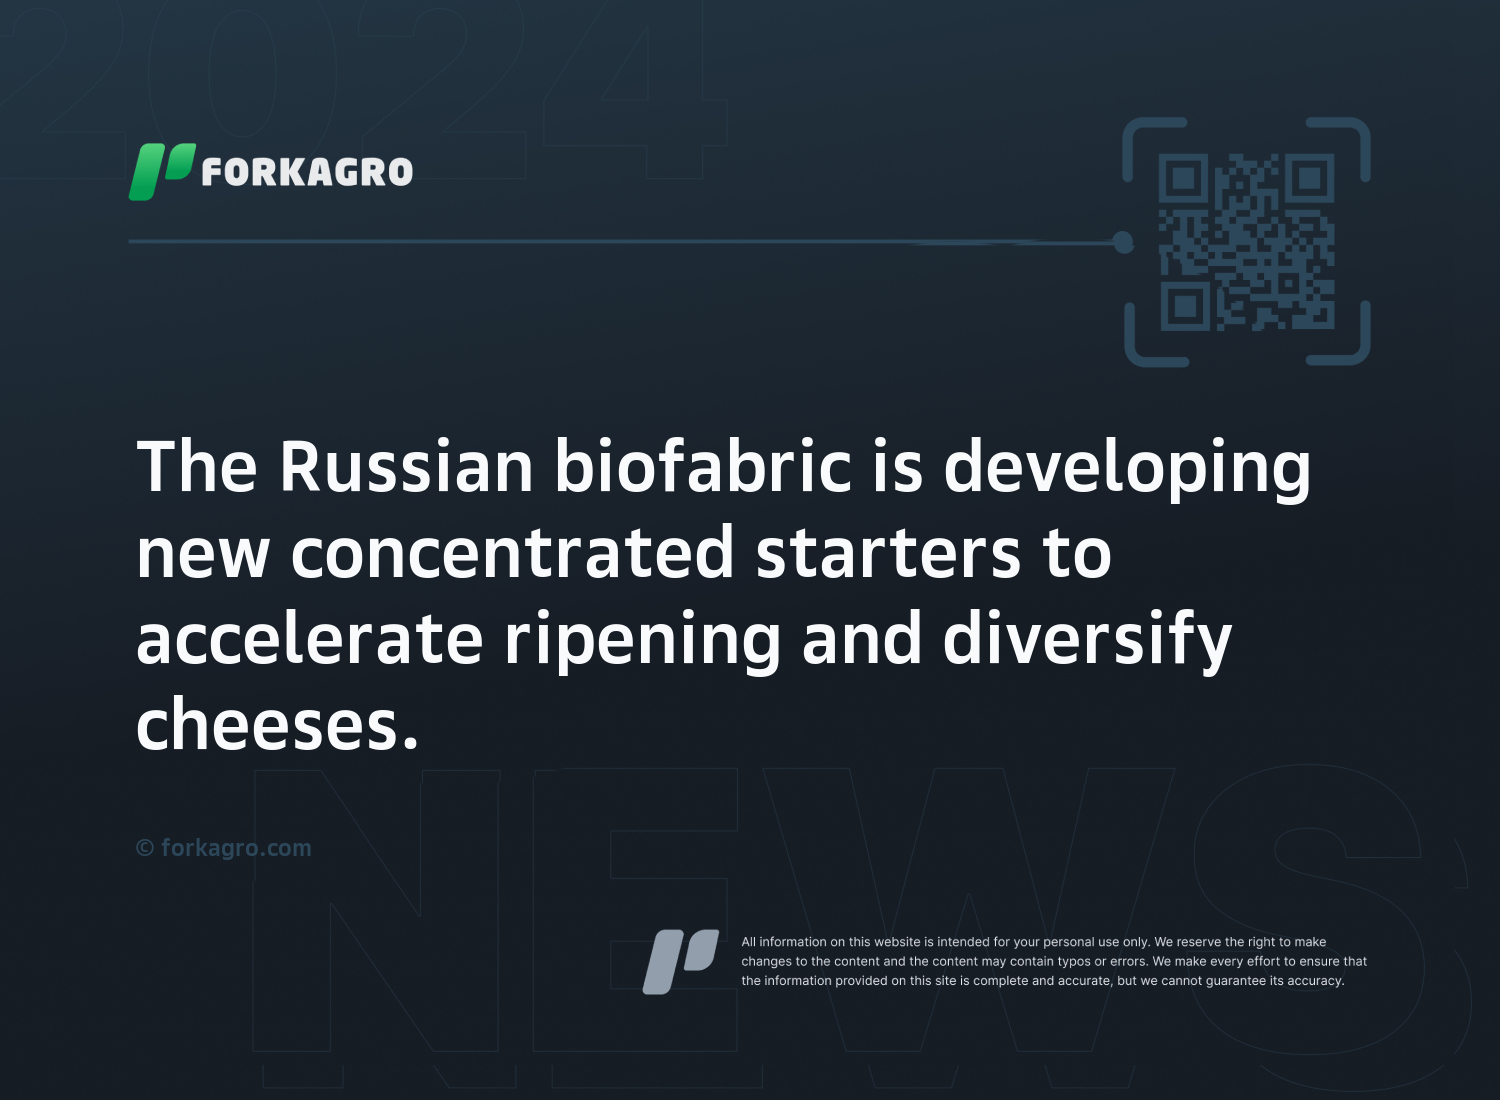 The Russian biofabric is developing new concentrated starters to accelerate ripening and diversify cheeses.